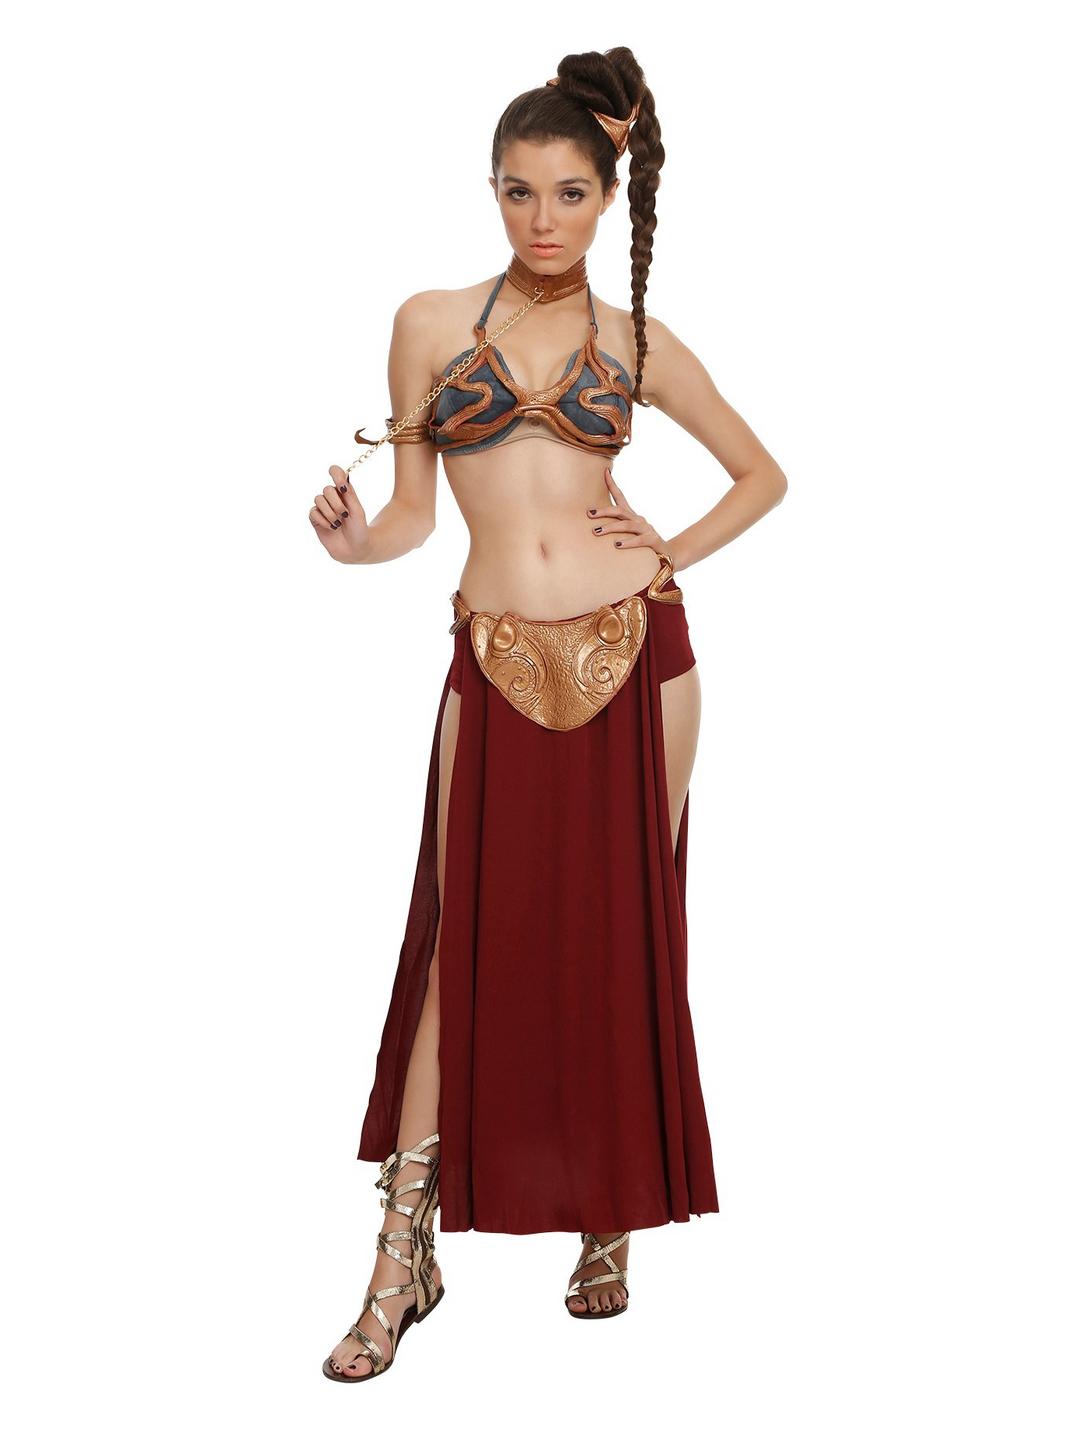 del spencer recommends Princess Leia Cosplay Hot